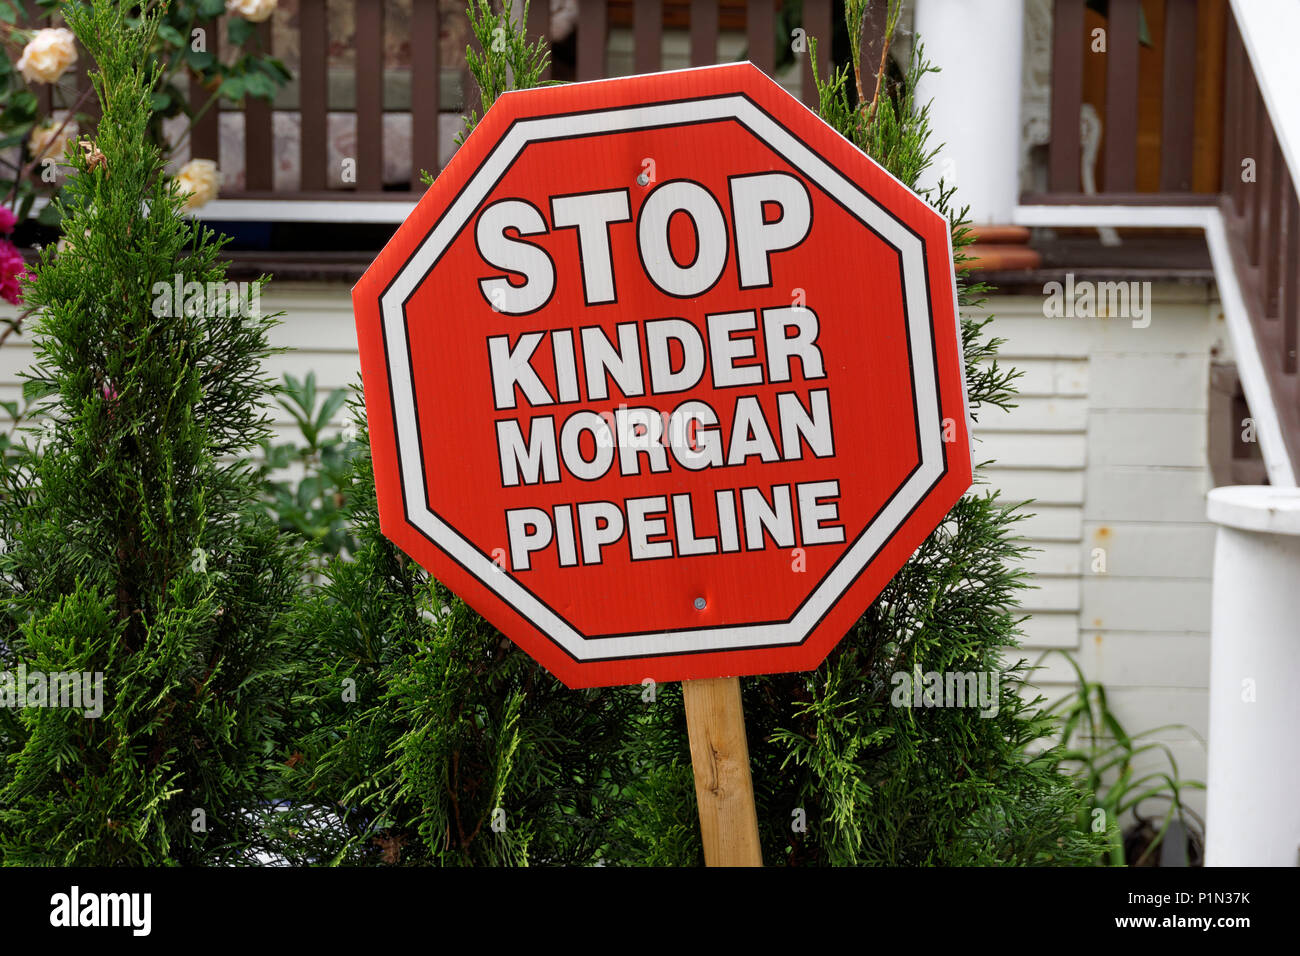 Stop Kinder Morgan Pipline protest sign ouside a house in Vancouver, BC, Canada Stock Photo